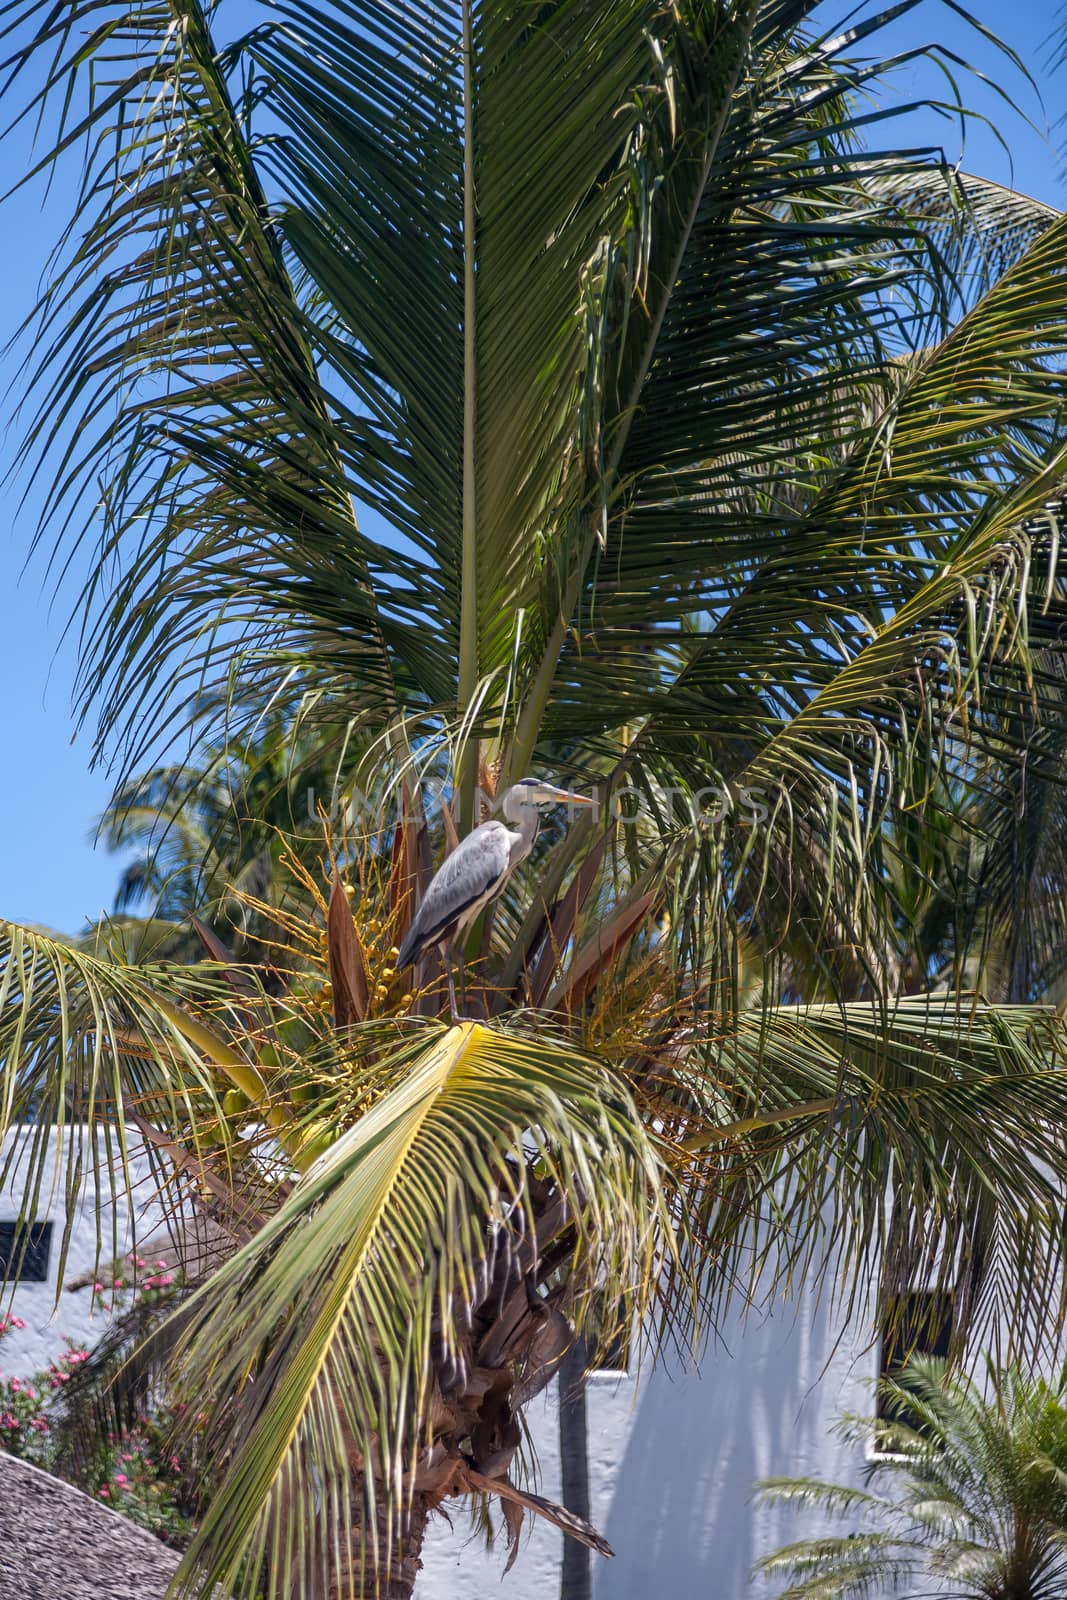 gray heron on the palm against the blue sky